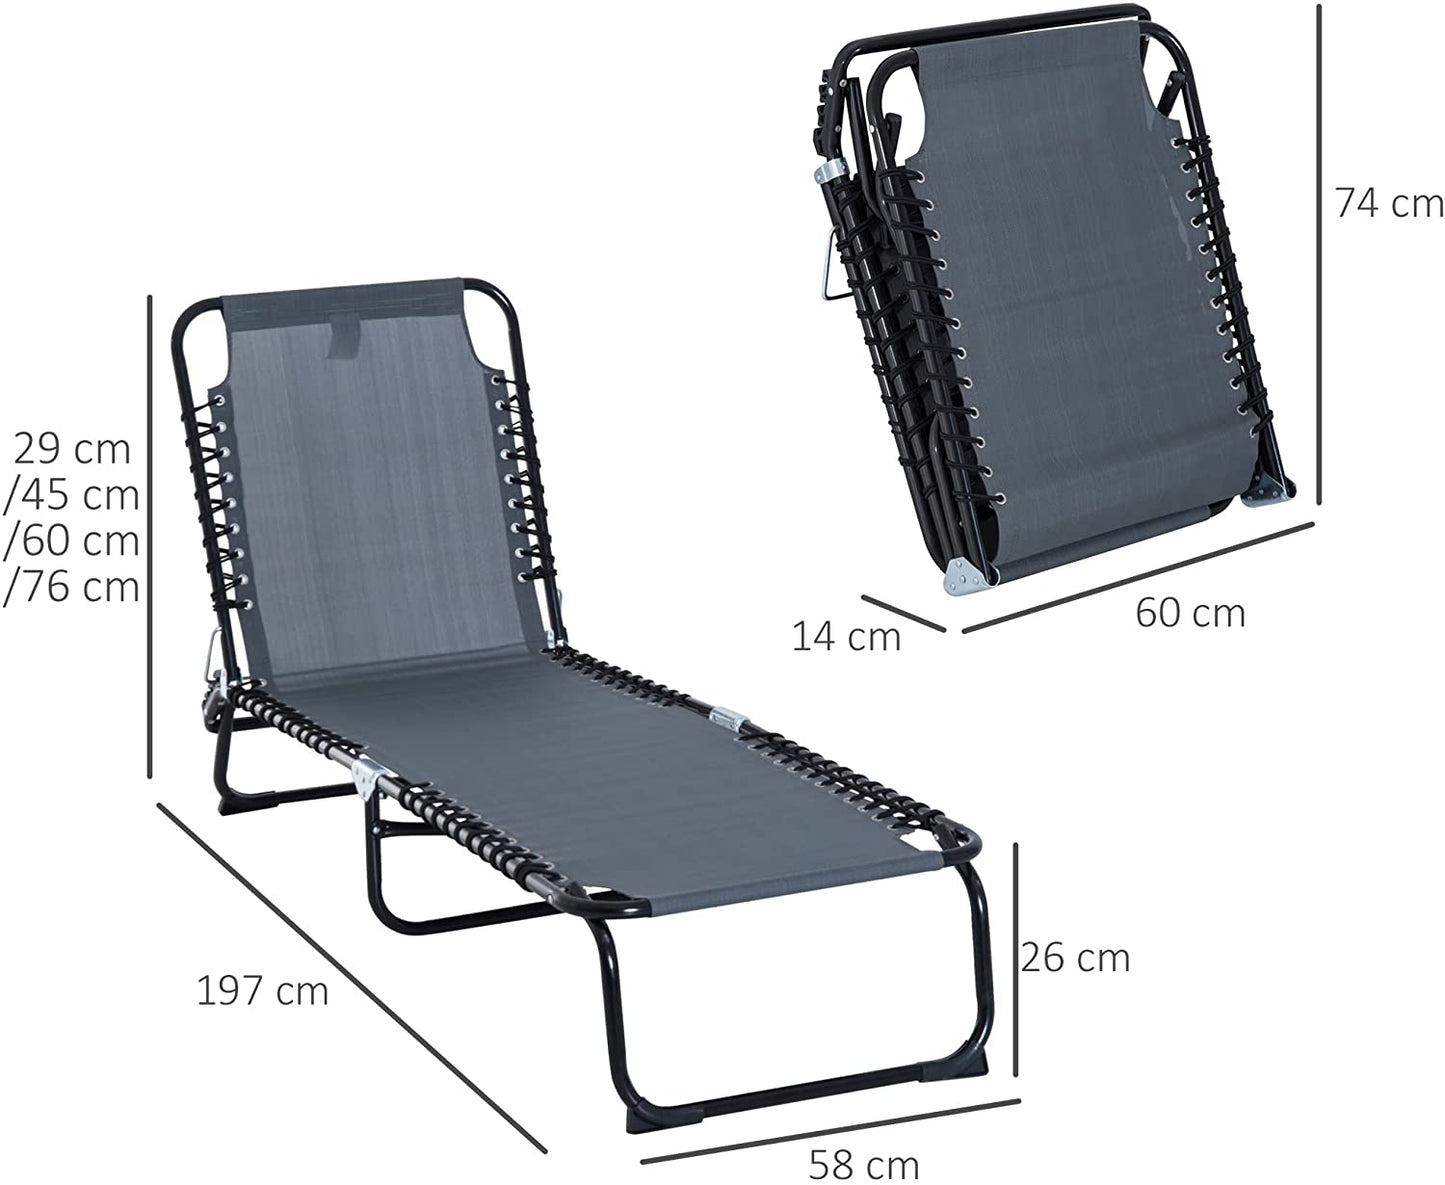 Outsunny Folding Sun Lounger, 3 Positions-Grey